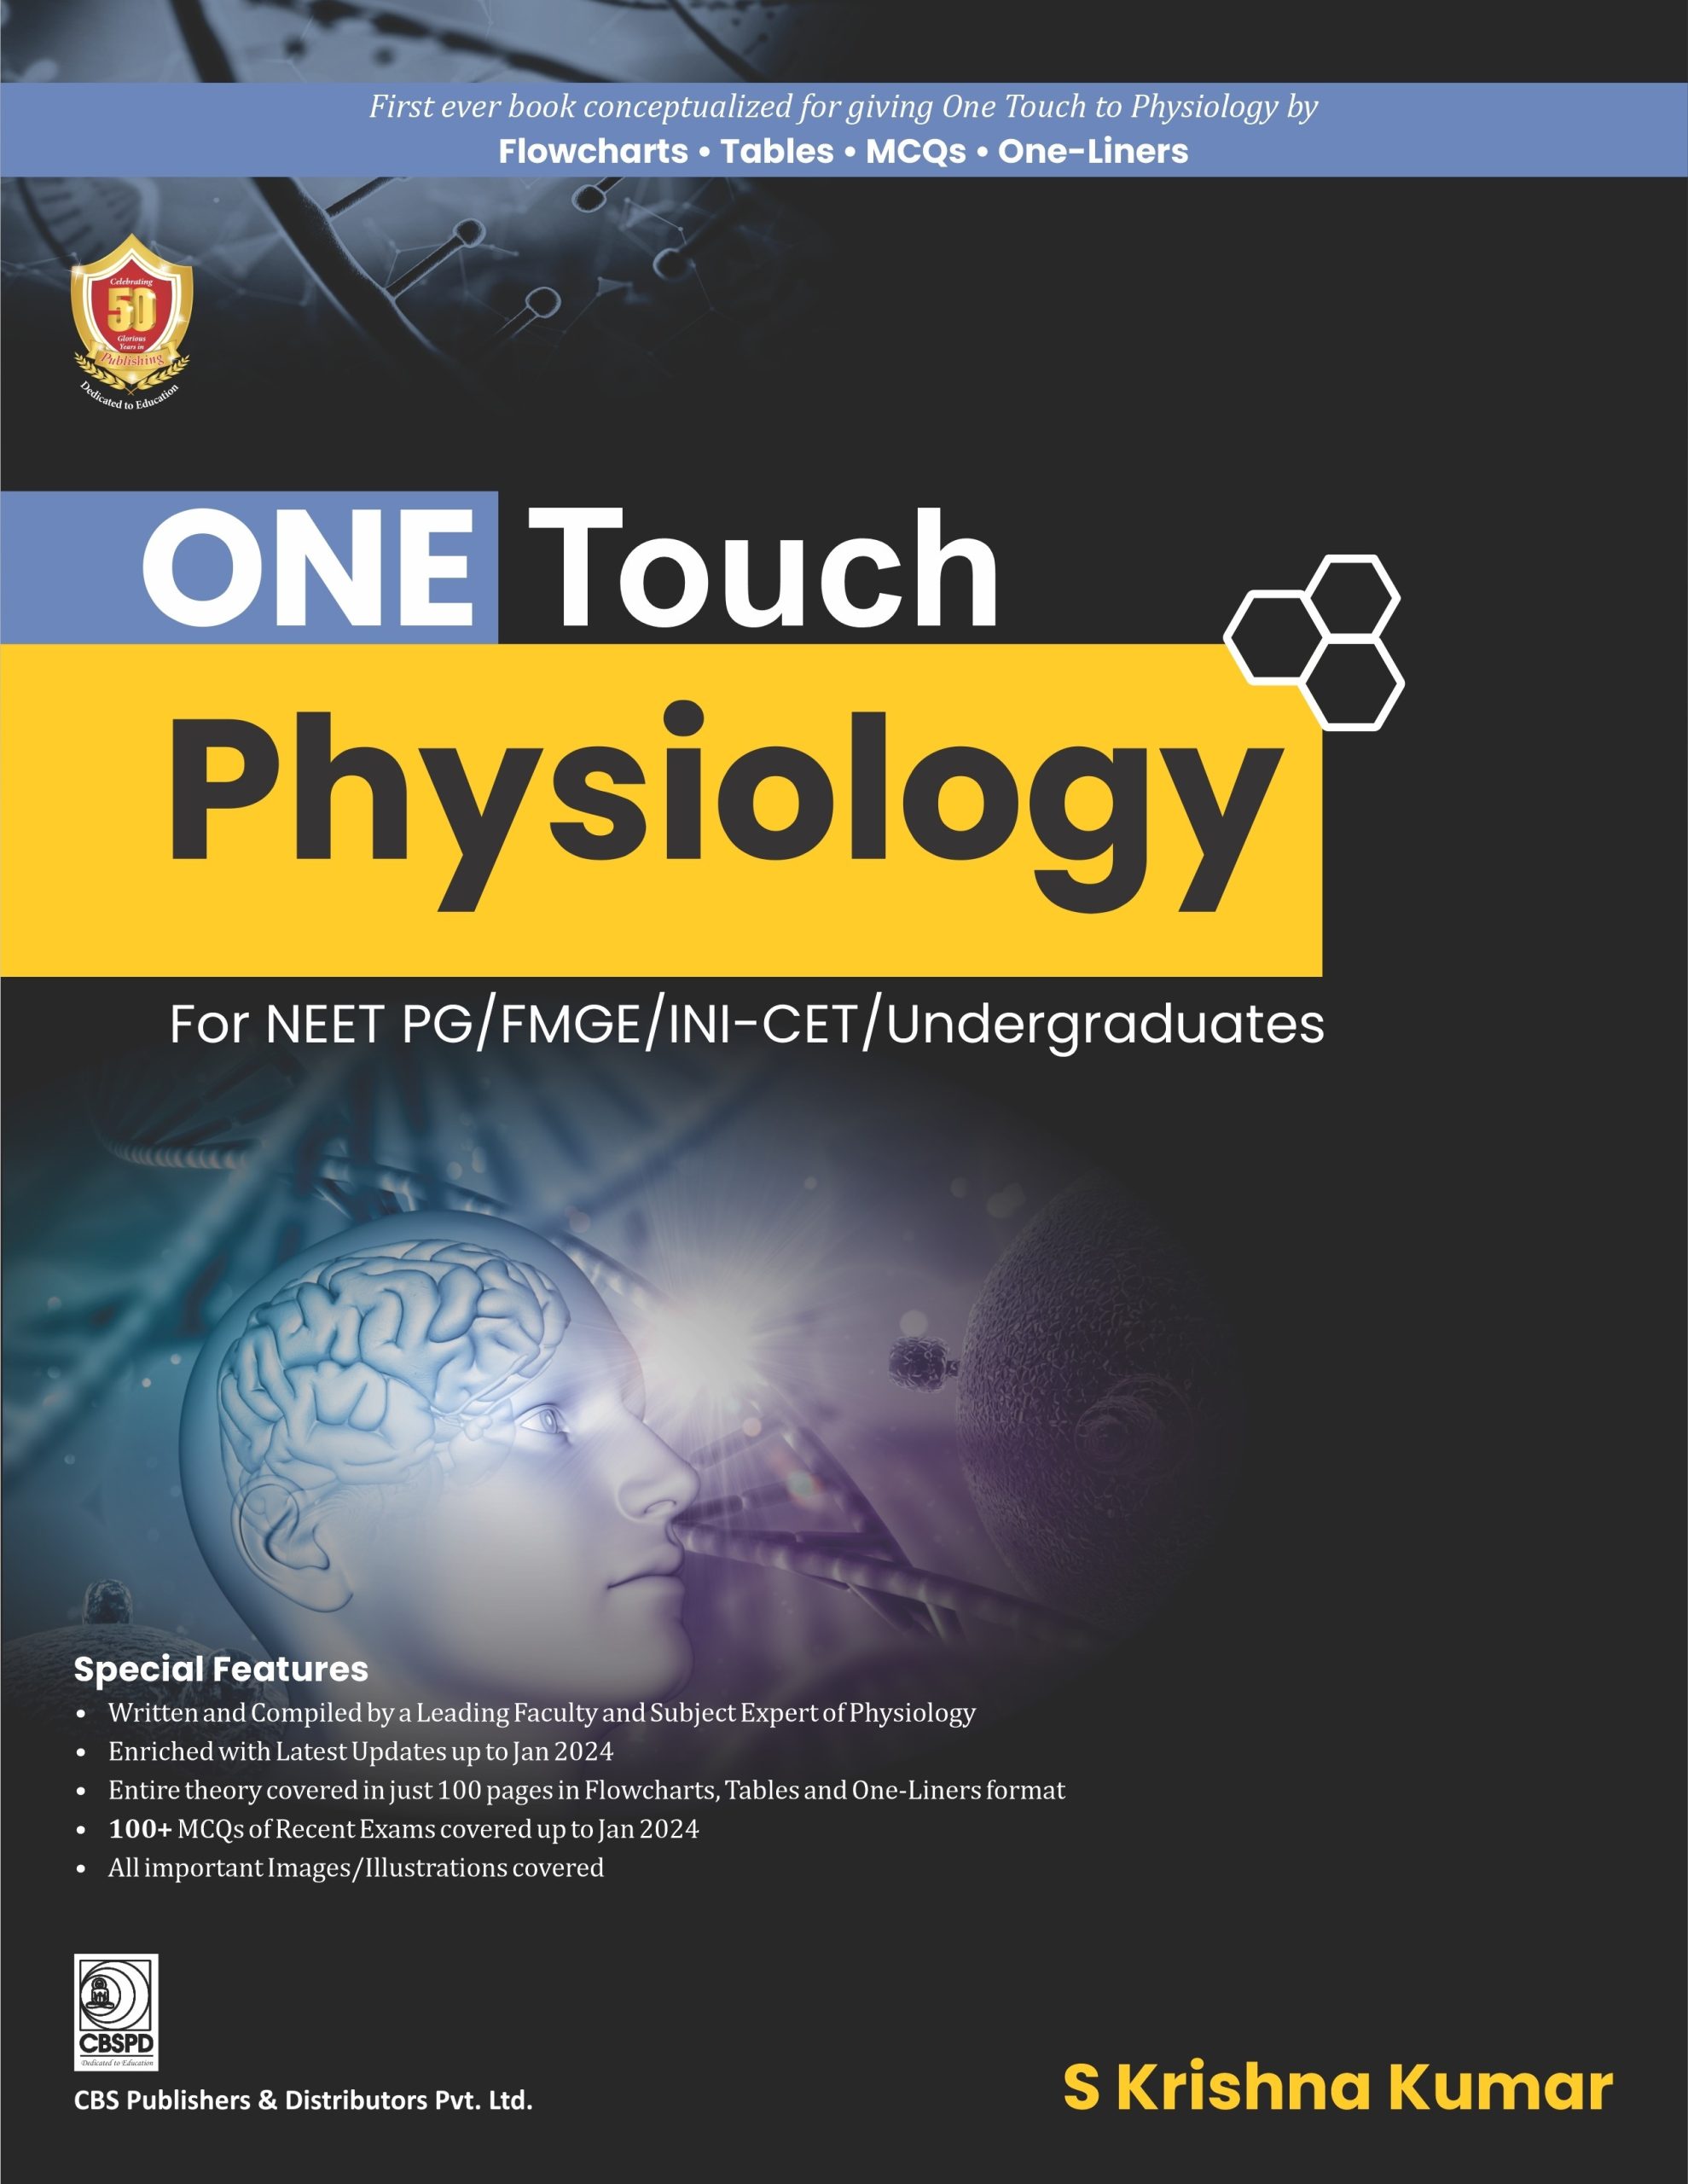 ONE Touch Physiology For NEET/NEXT/FMGE/INI-CET